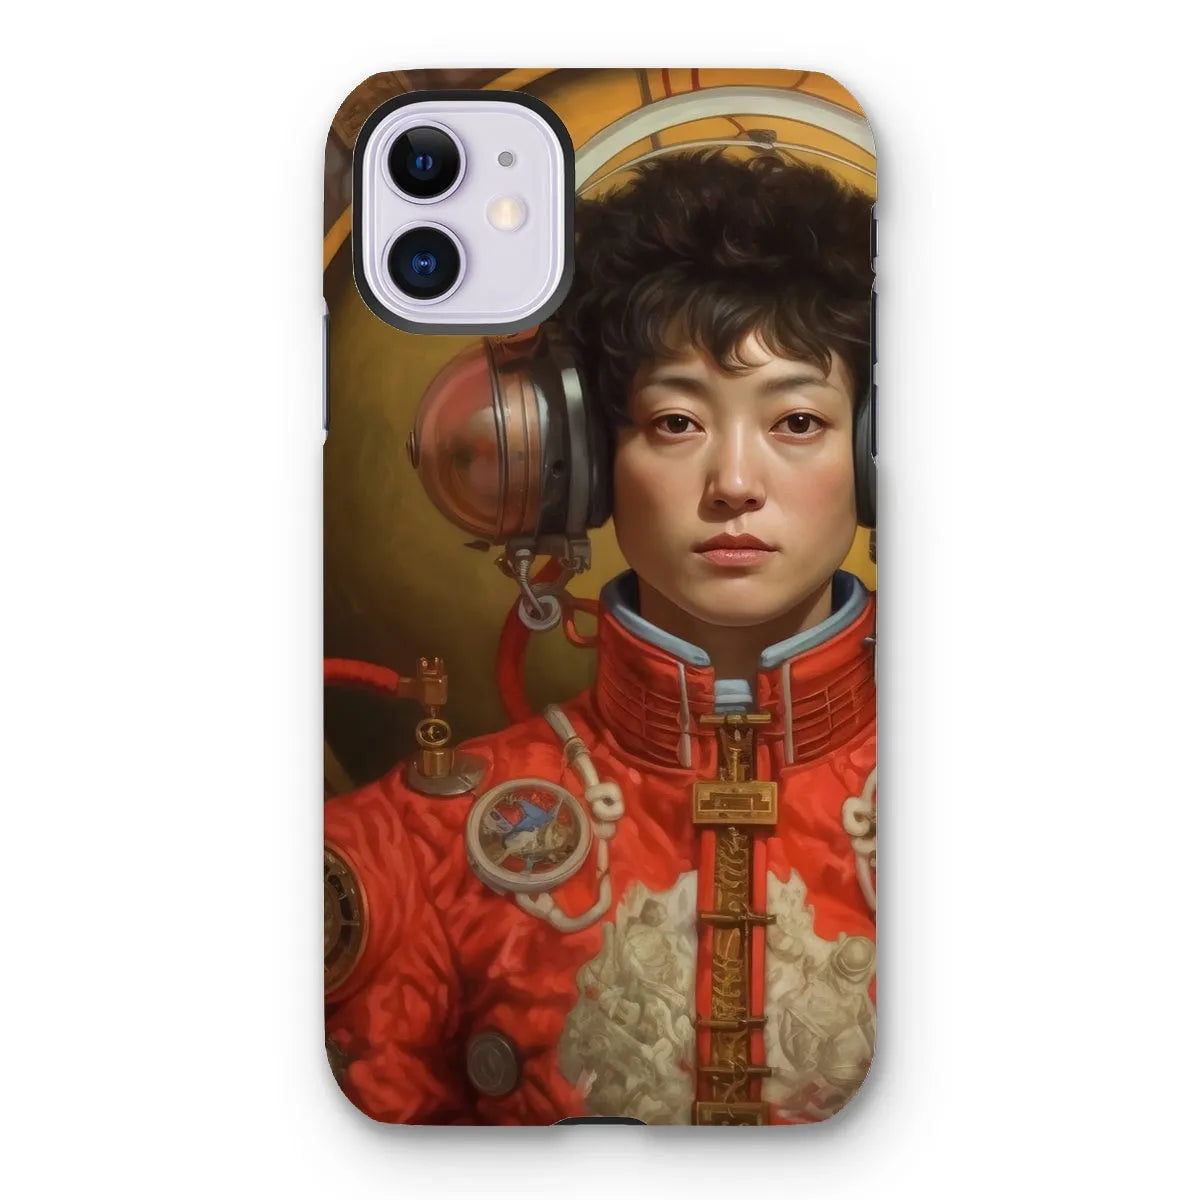 Mùchén - Gay Chinese Astronaut Aesthetic Phone Case - Iphone 11 / Matte - Mobile Phone Cases - Aesthetic Art